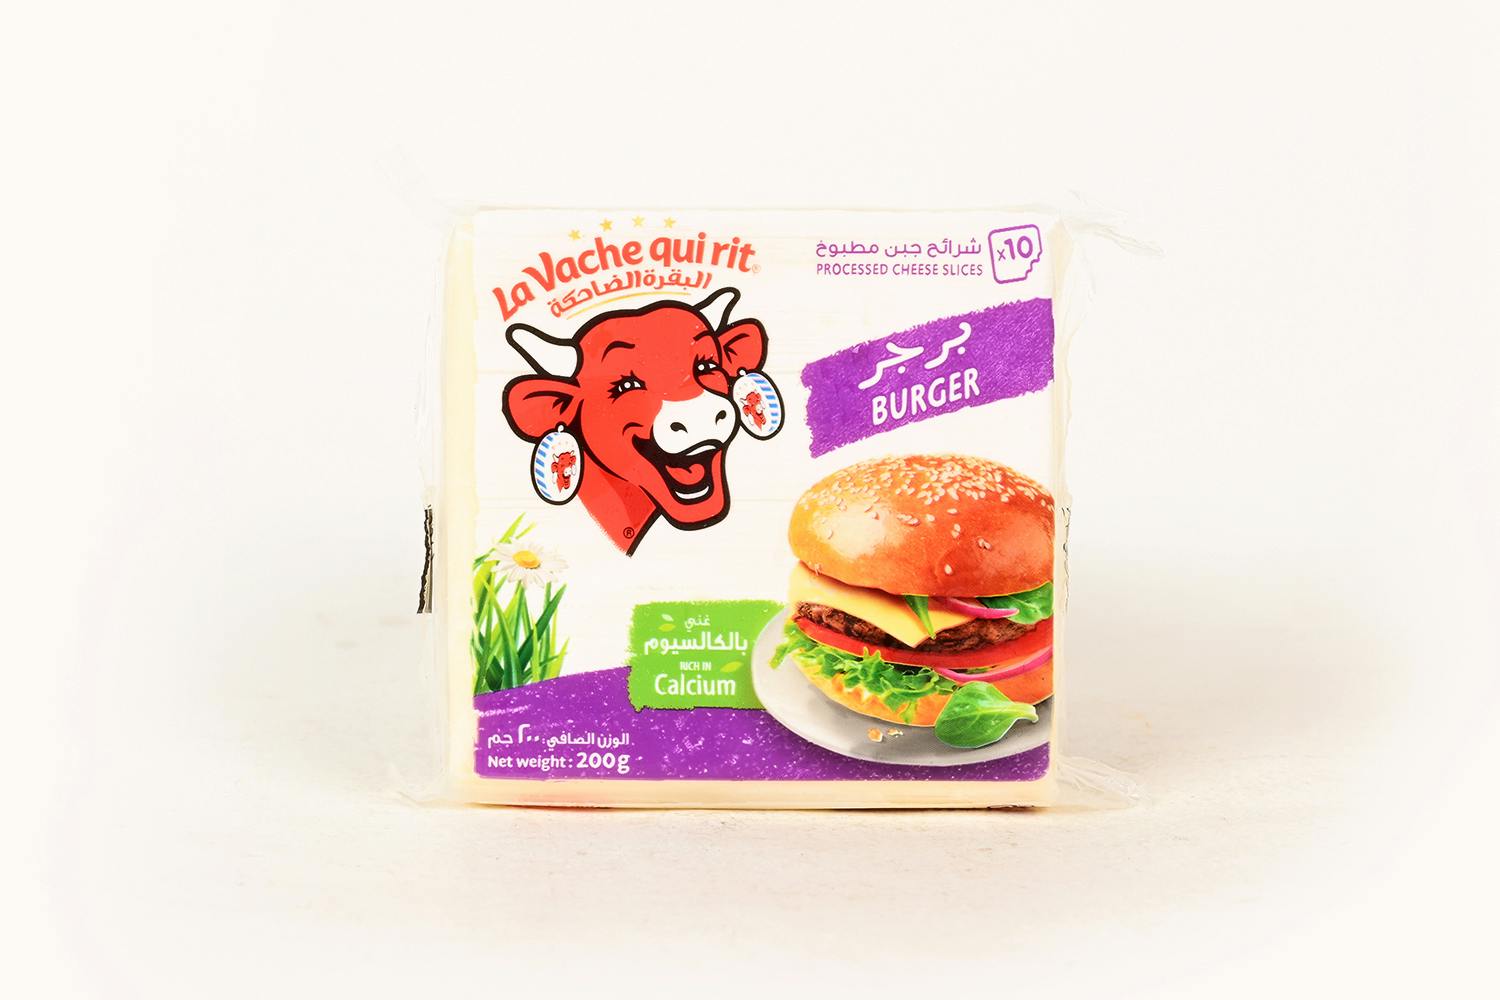 The Laughing Cow Burger Cheese Slices